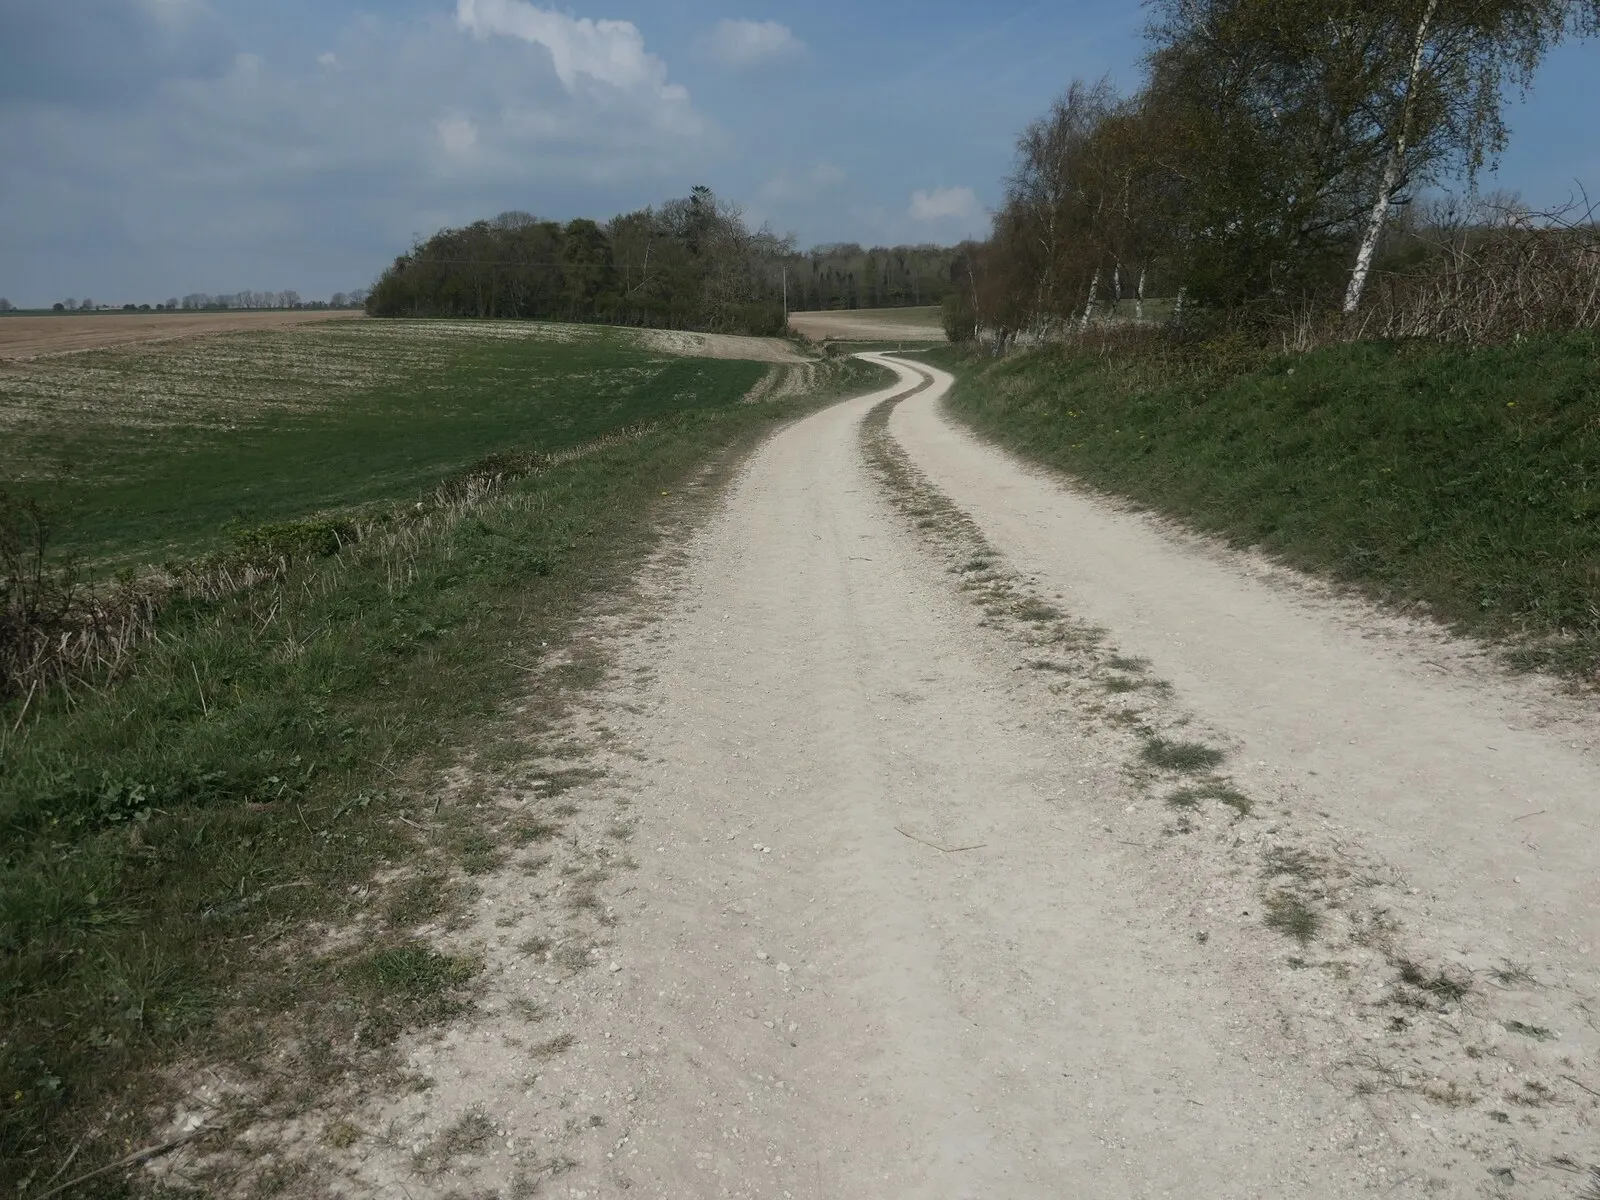 Photo showing: "Meet a chalky track ... heading up towards the woods", Garton-on-the-Wolds, East Riding of Yorkshire, England. Public bridleway on an access track to Garton Field. Quoted from Walk No. 3, Wetwang, in Sally Burnard's book 'Pocket Pub Walks in East Yorkshire'.